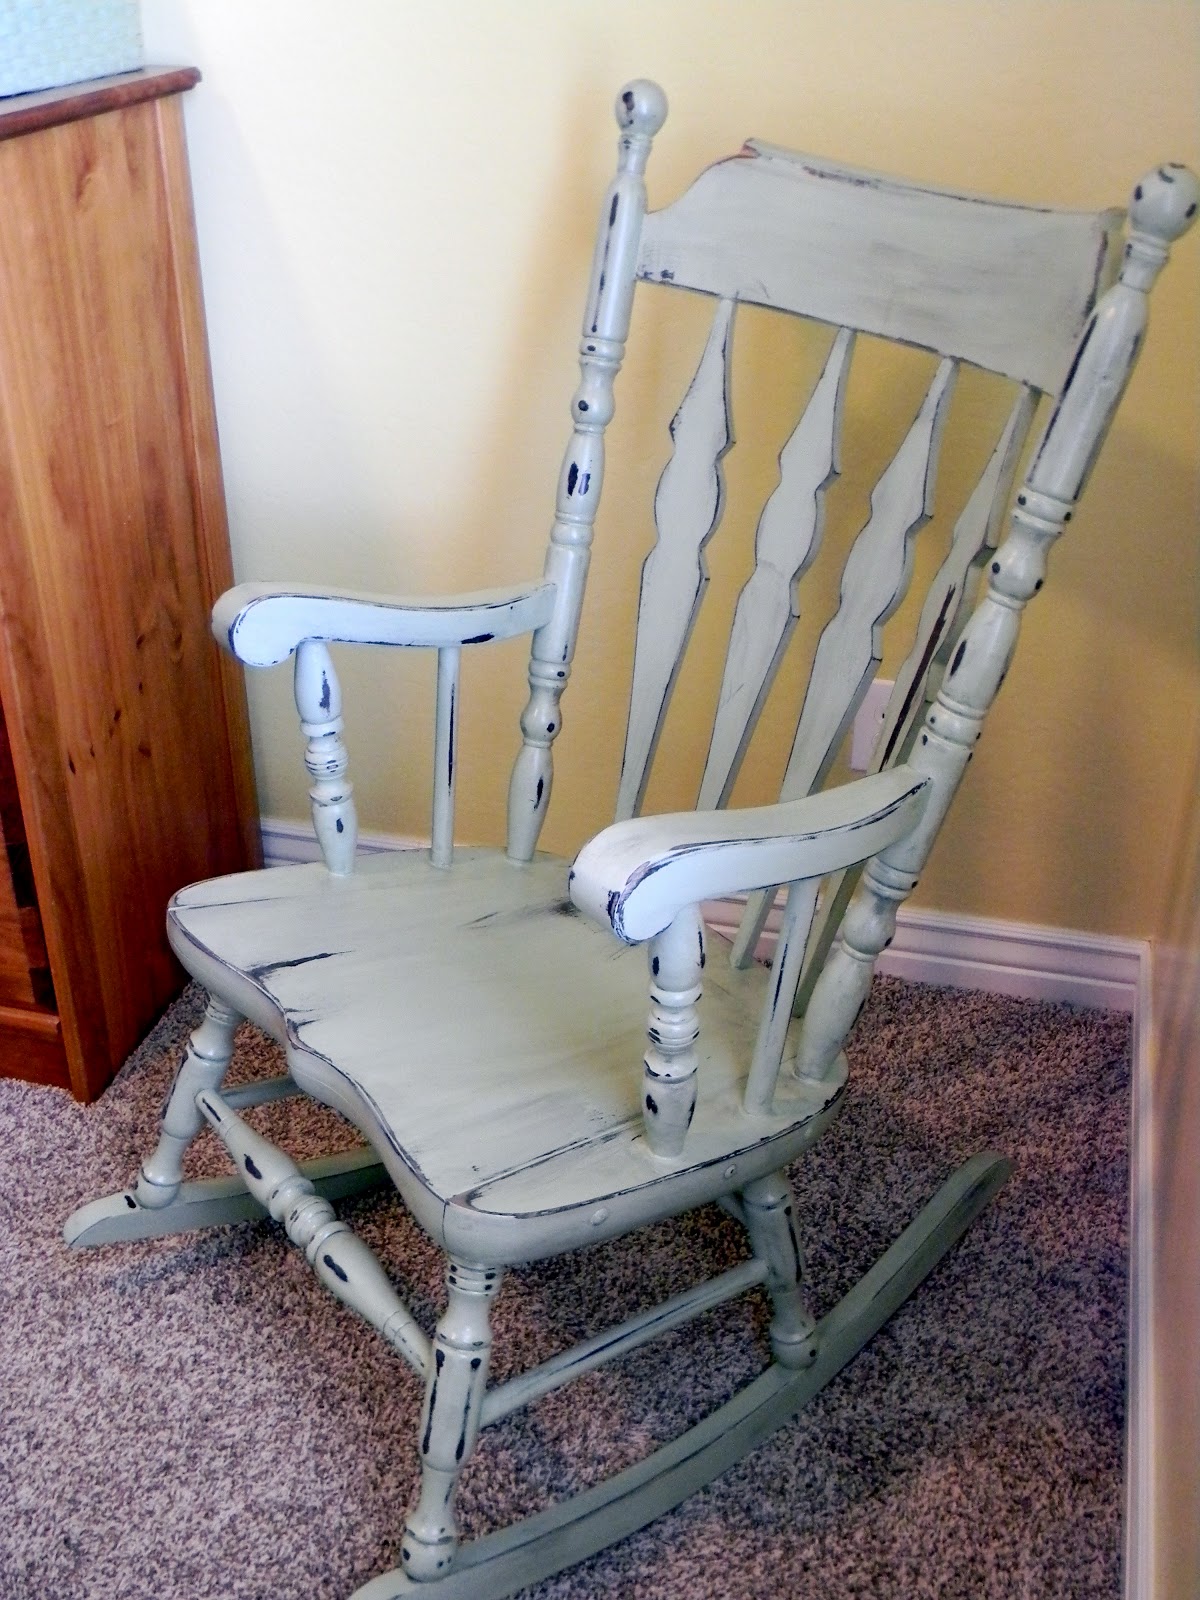 Little Bit of Paint: My Mother's Rocking Chair